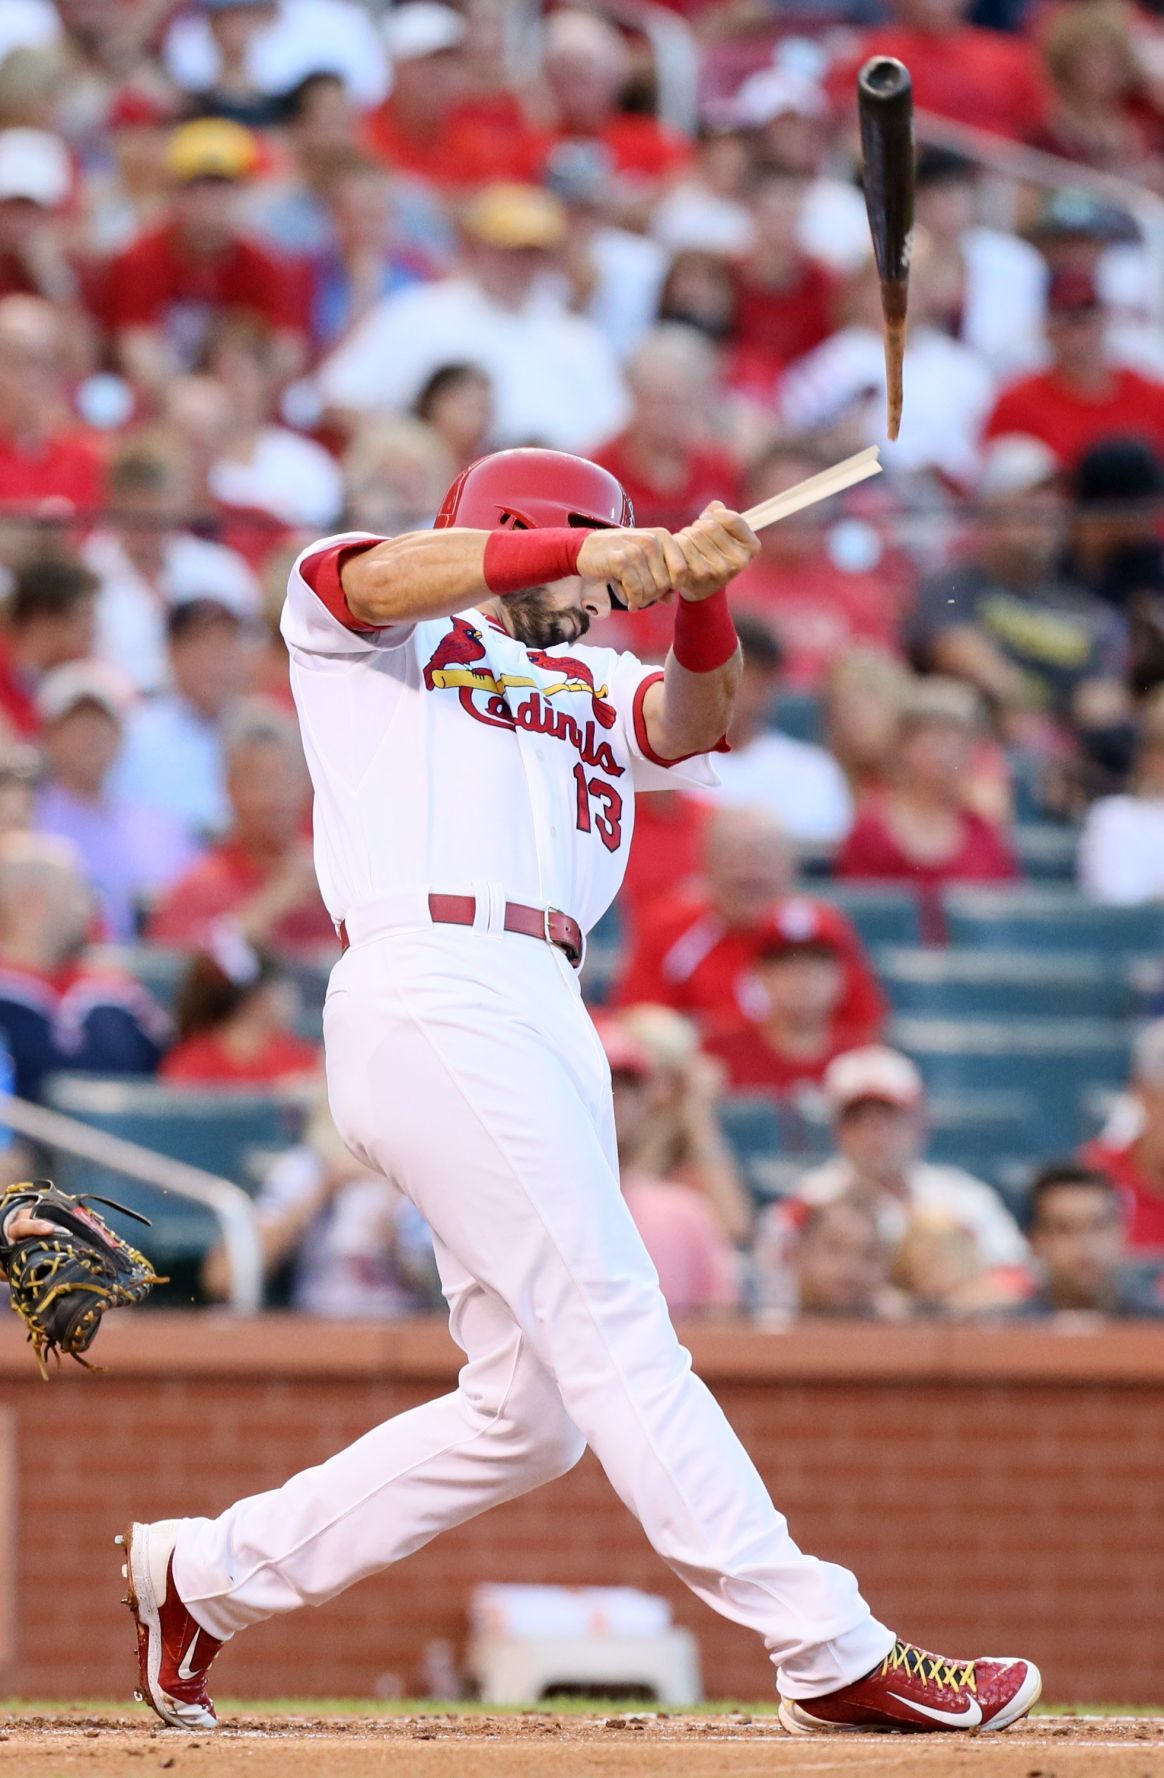 Cards take first game against Pirates | St. Louis Cardinals | mediakits.theygsgroup.com